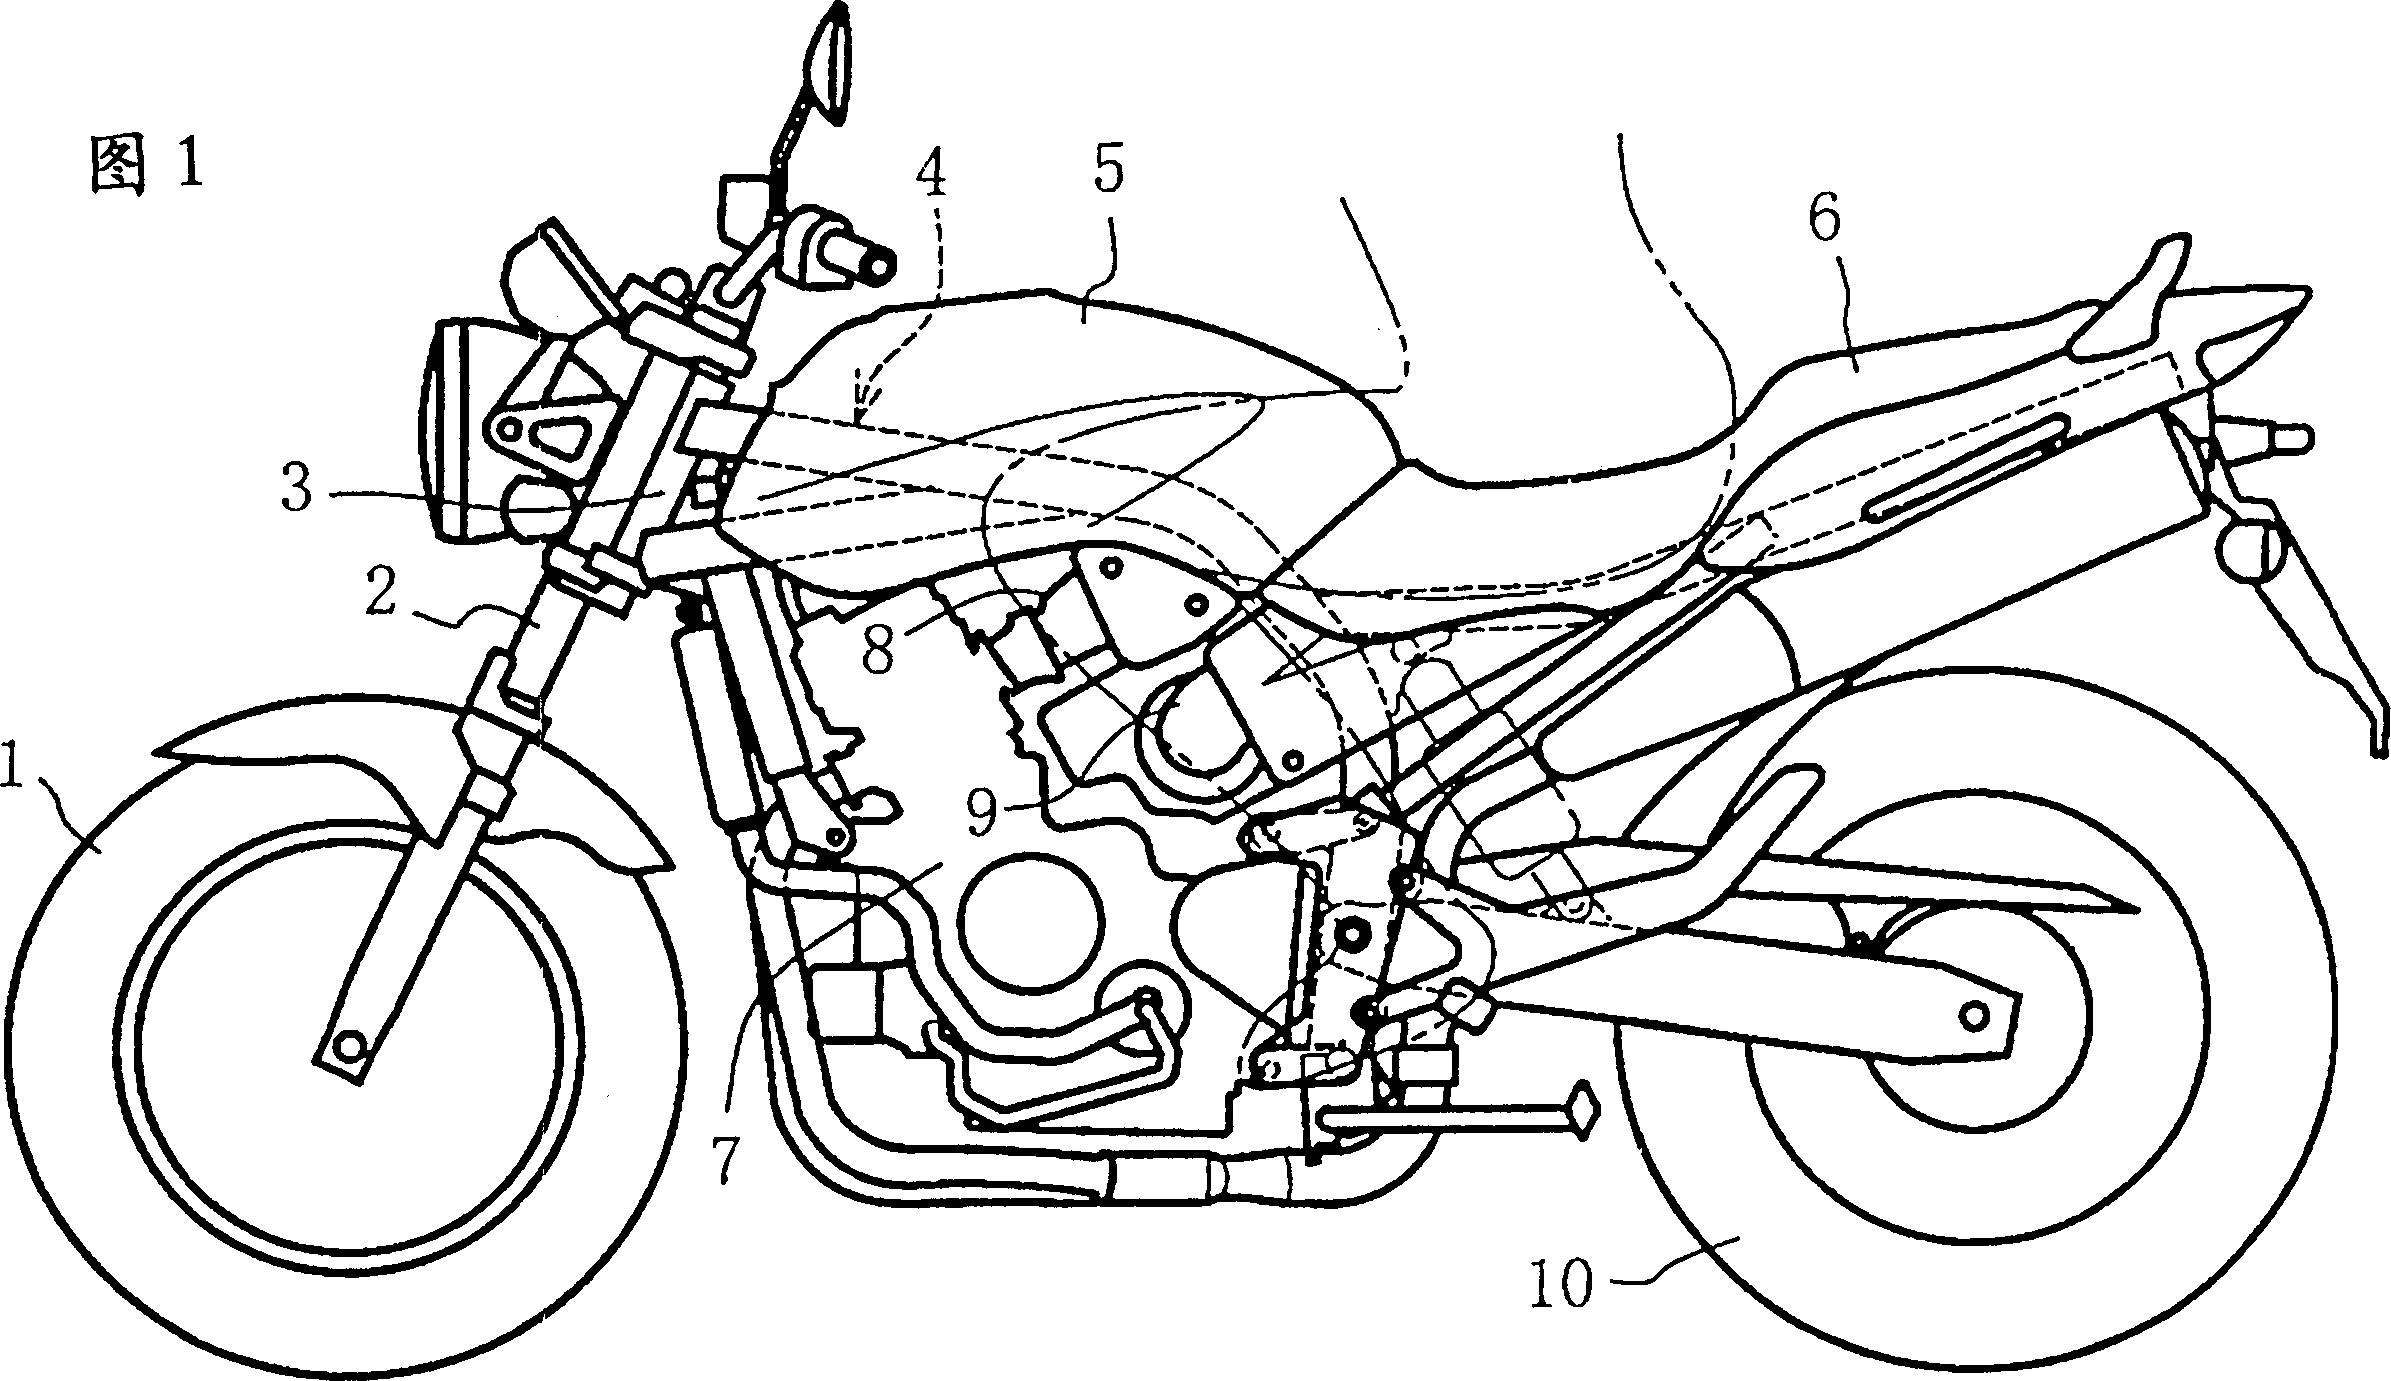 Mounting structure of fuel box for motor bicycle